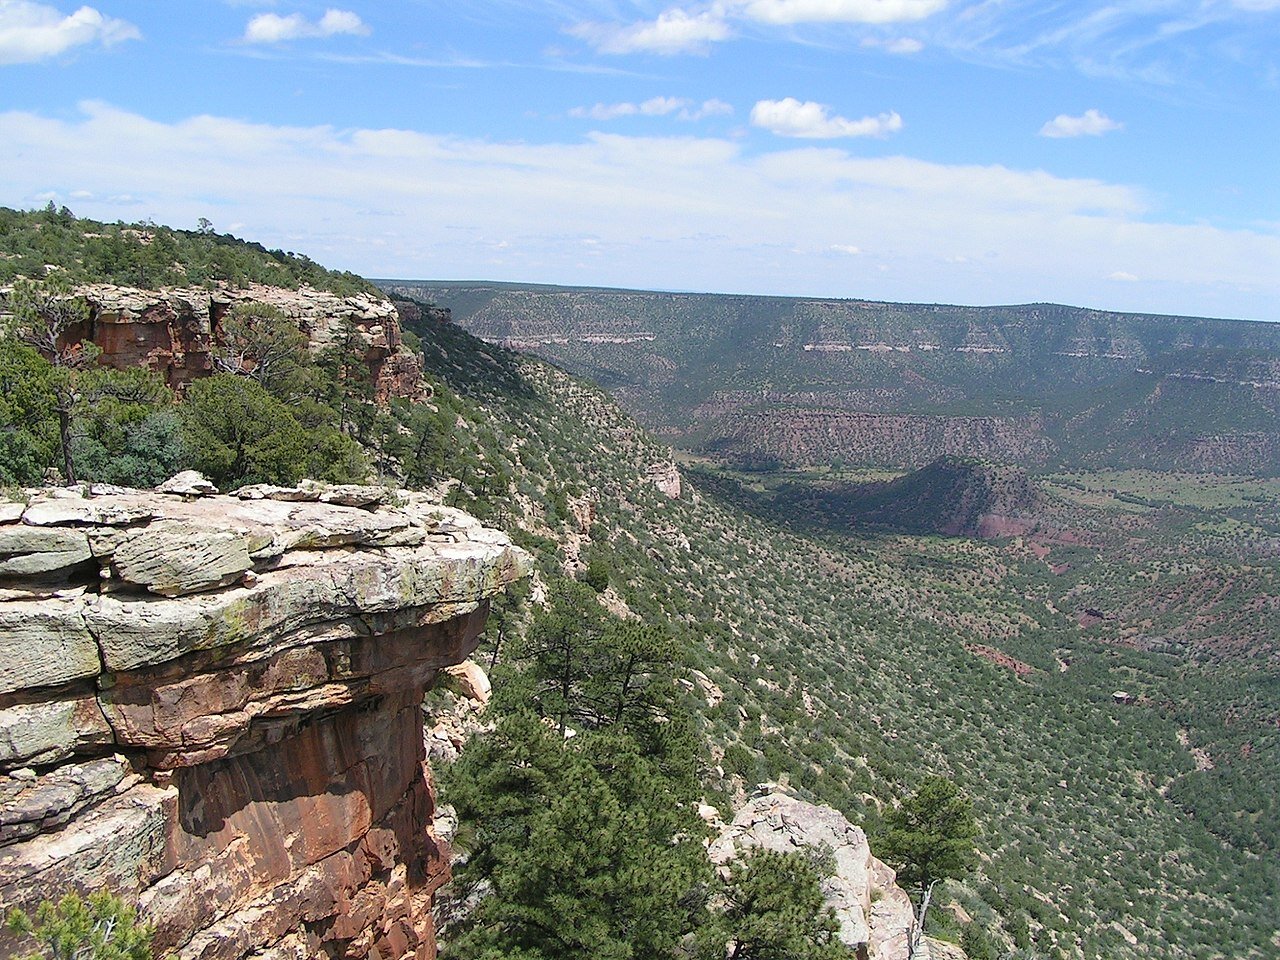 PICTURED: The 16,030-acre Sabinoso Wilderness is a remote area in the northeastern portion of New Mexico.